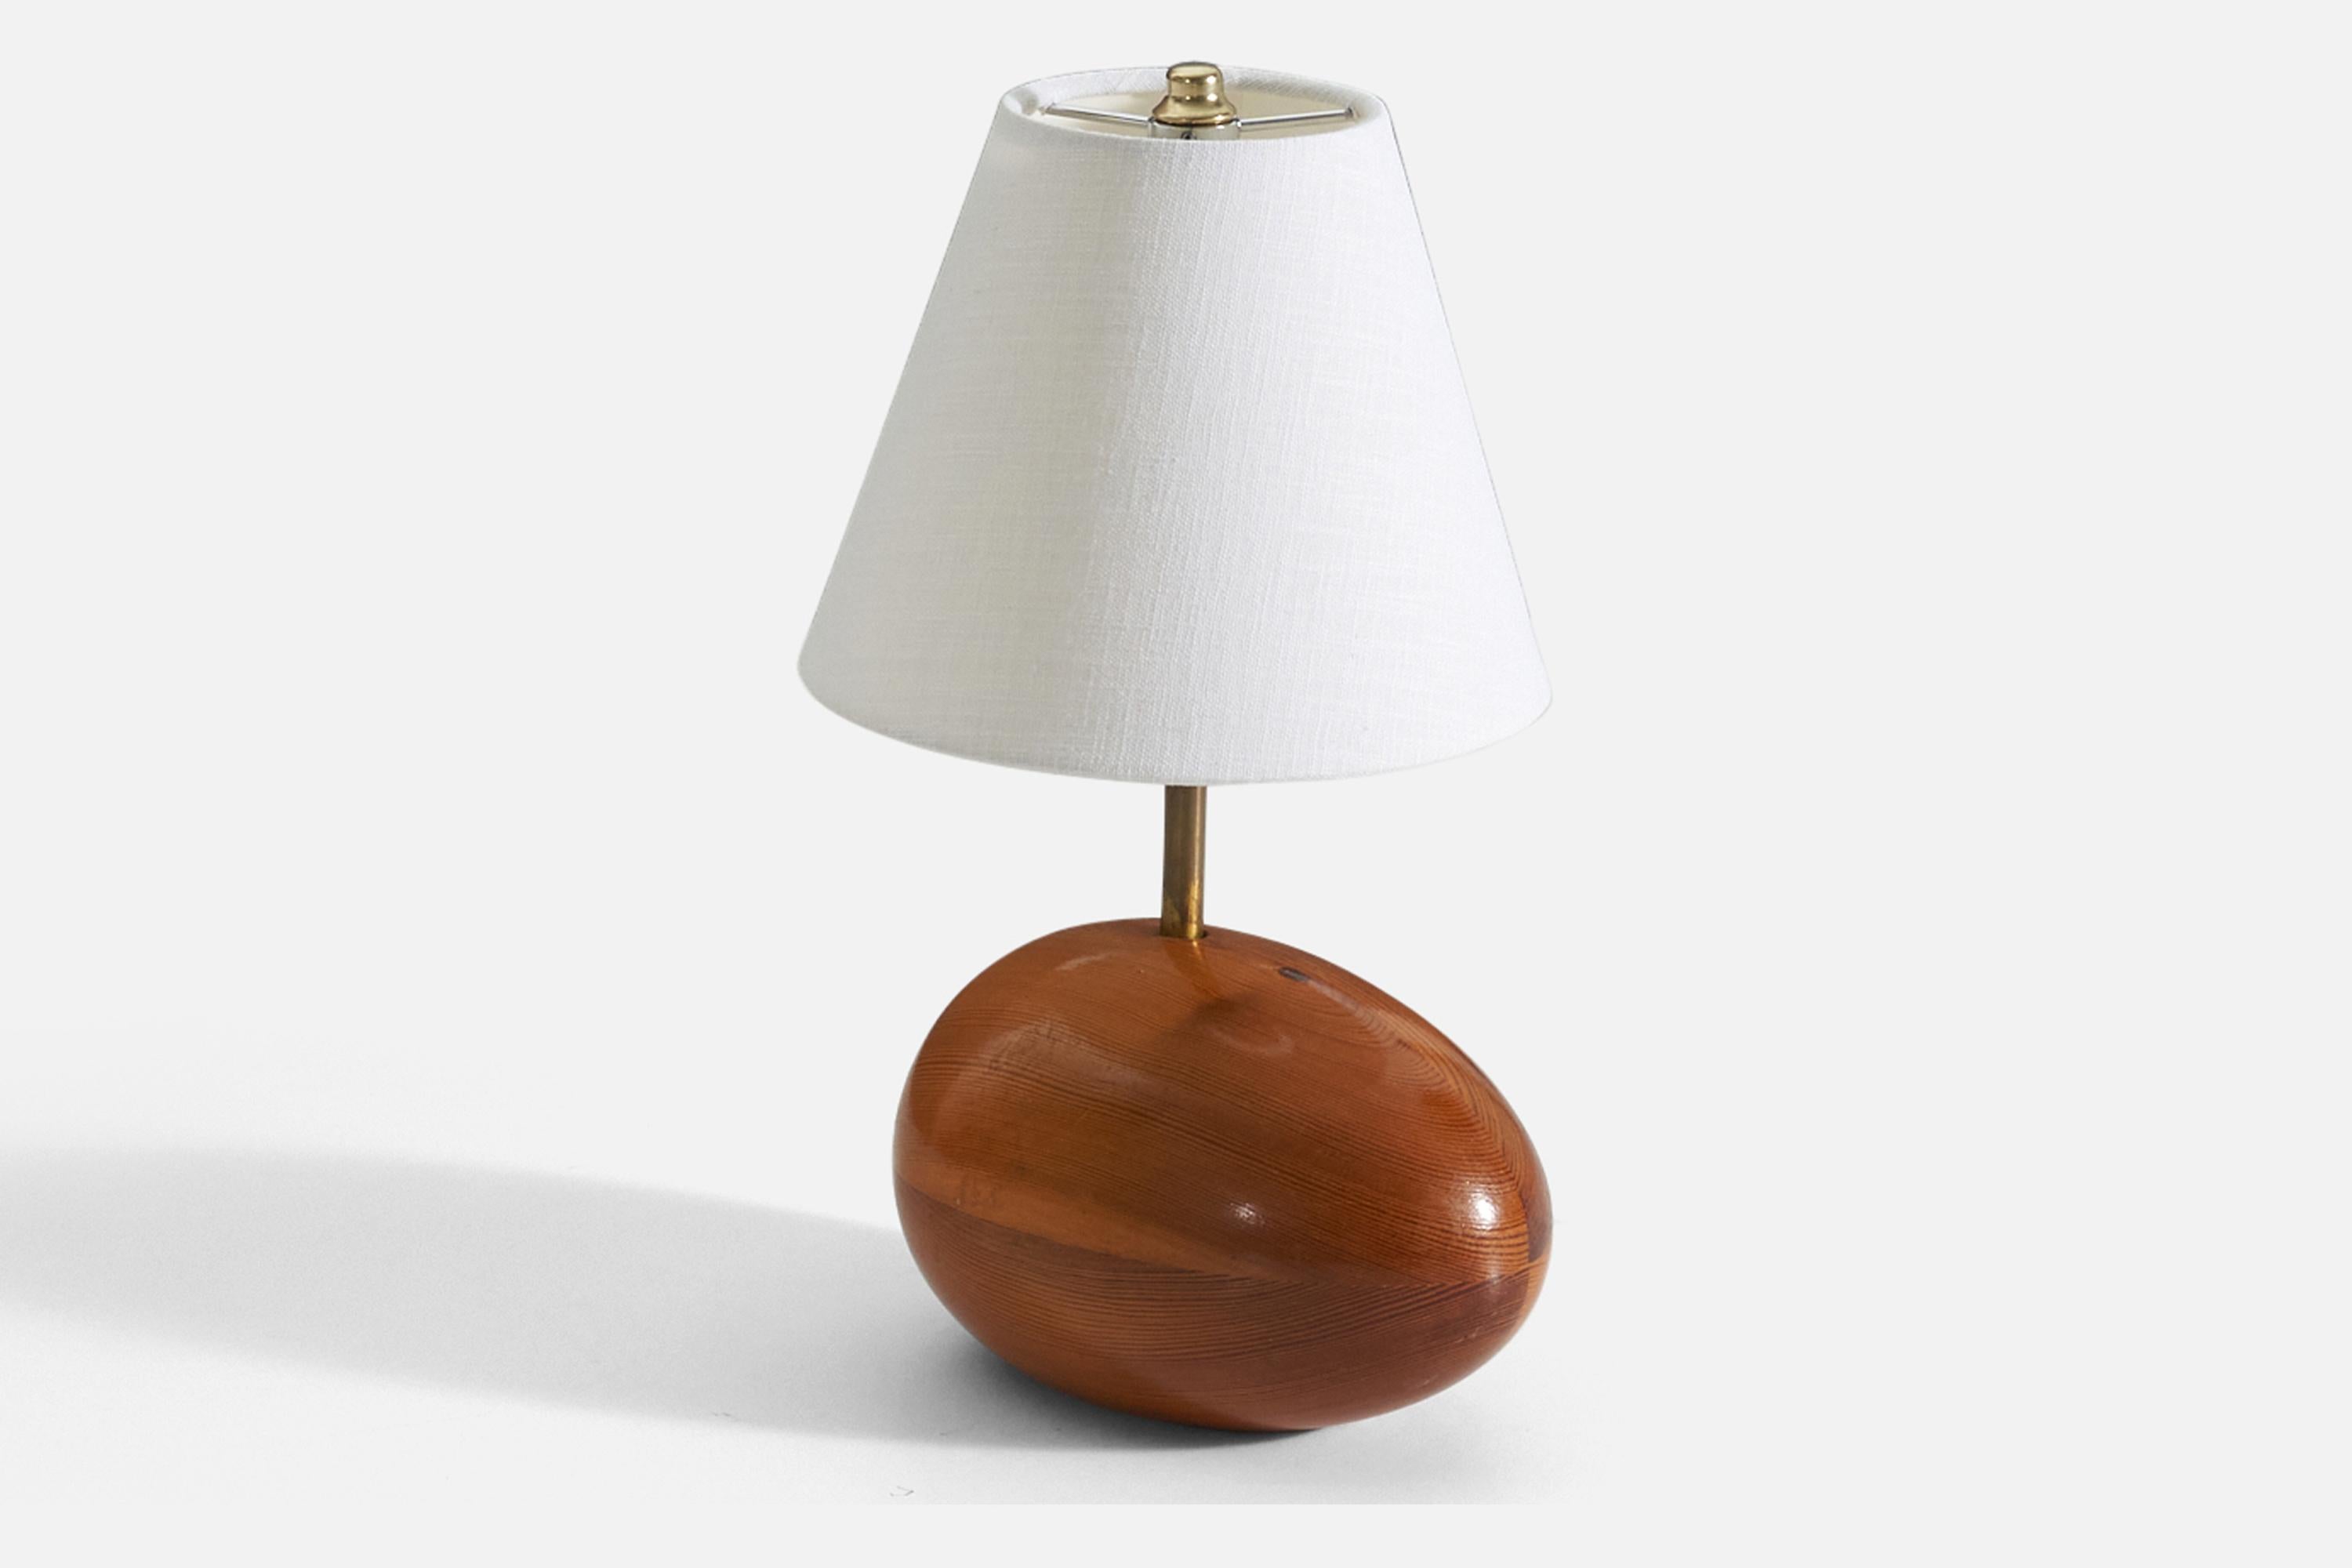 A table lamp. Base in solid pine. Brass neck. 

Stated dimensions exclude lampshade, height includes socket. Sold without lampshade.